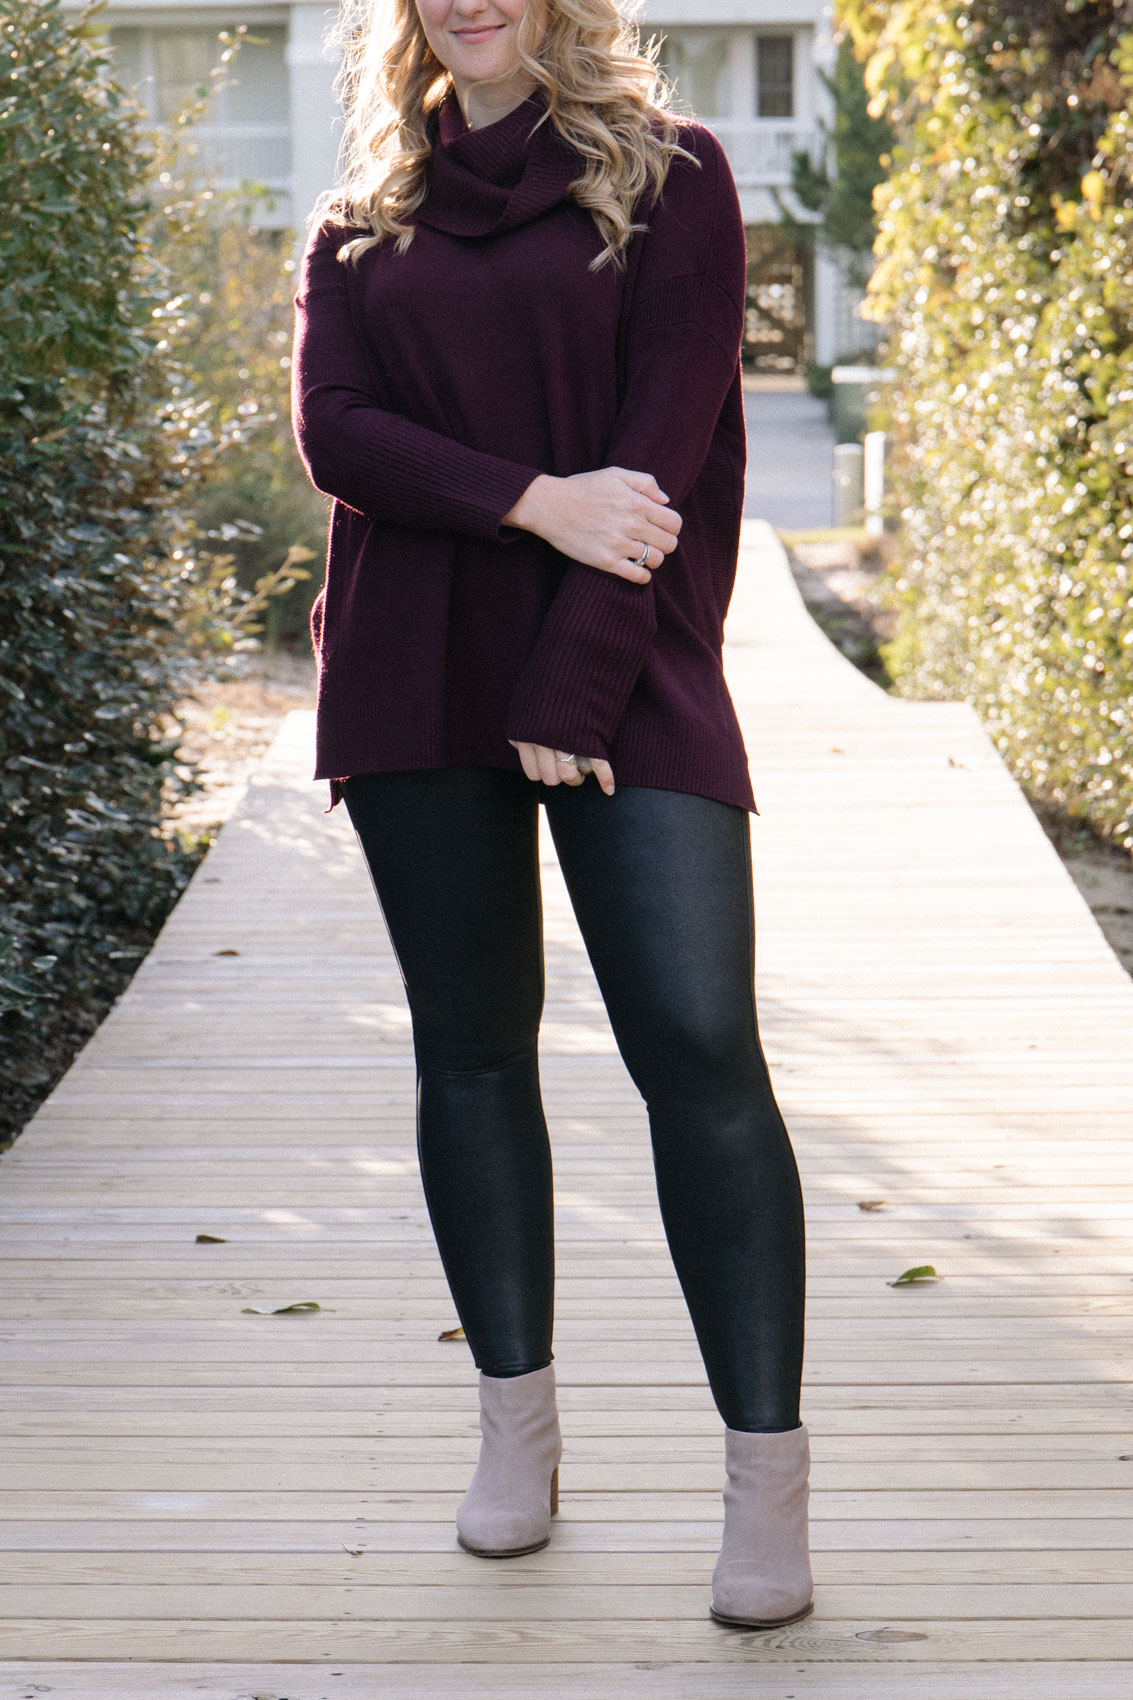 Spanx leggings outfit